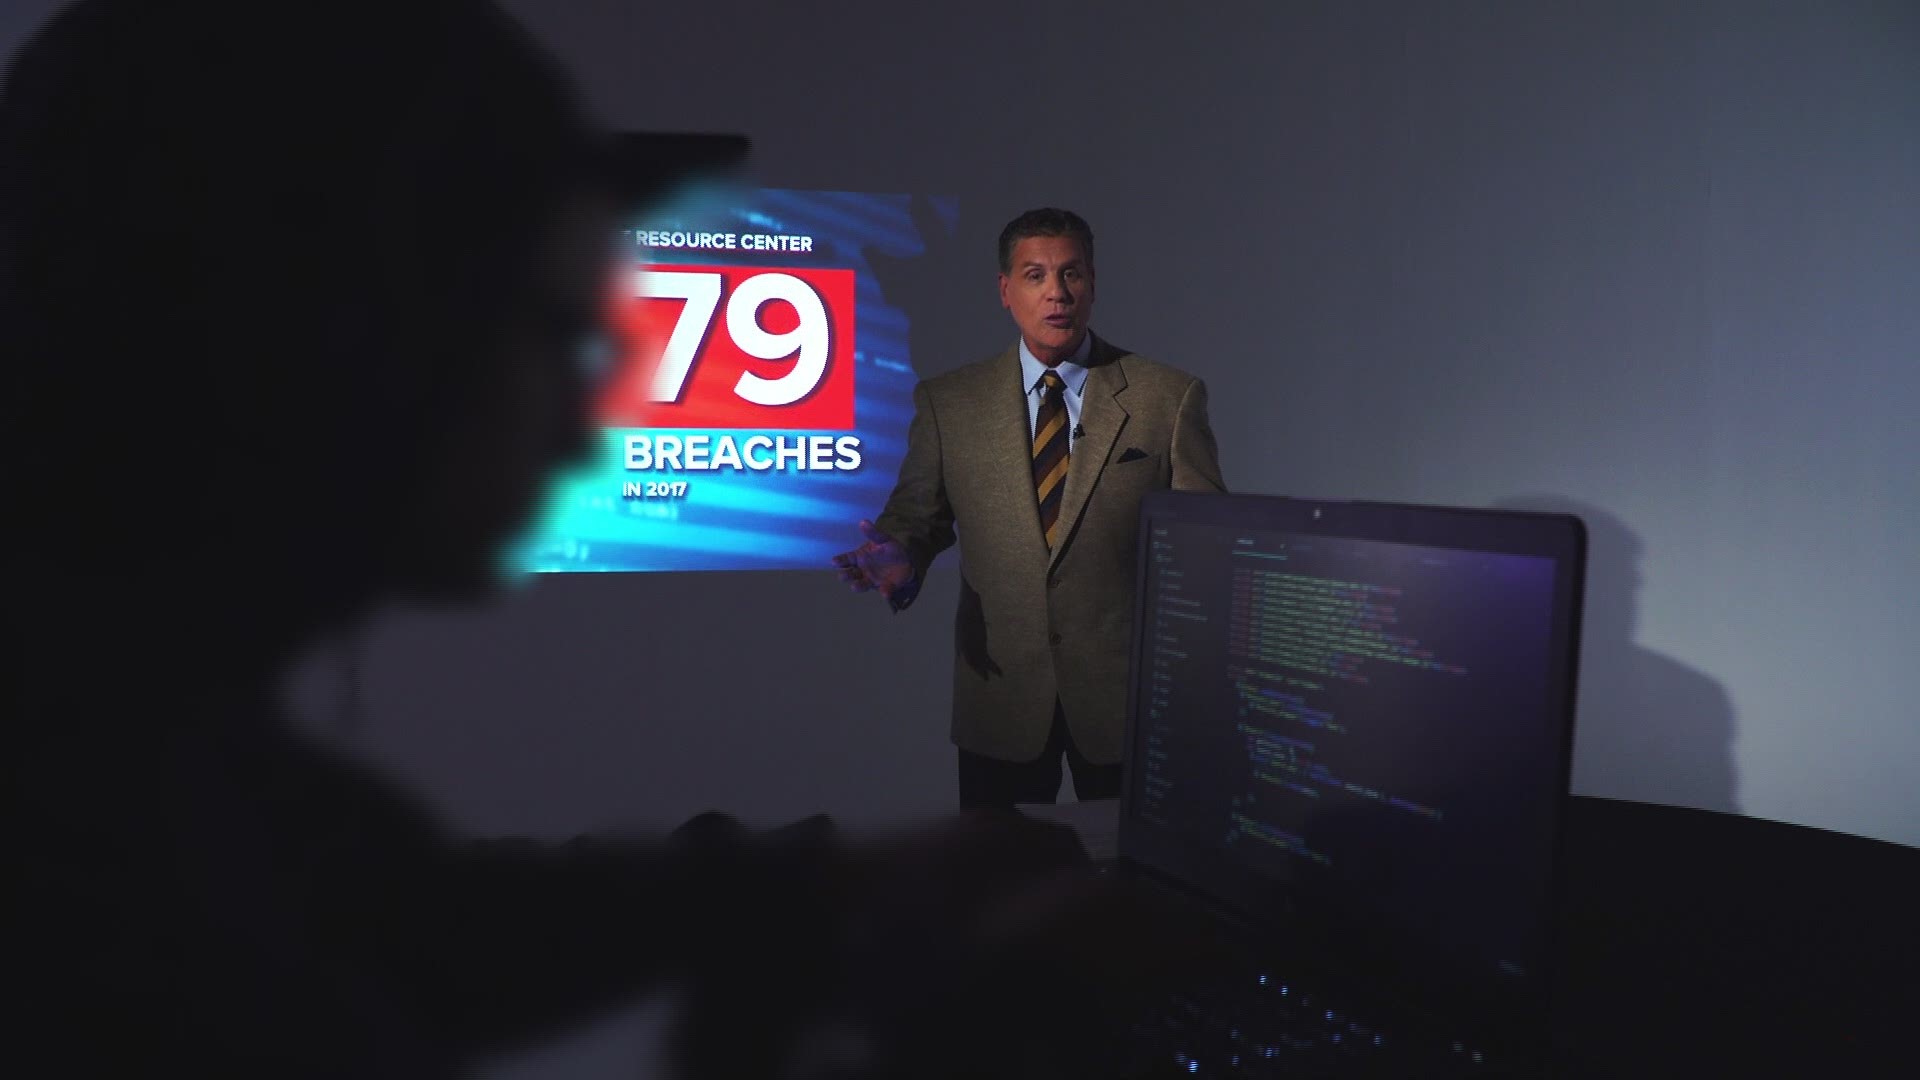 Ethical hackers find and report vulnerabilities to businesses by hacking them. https://kare11.tv/2qxCTRe